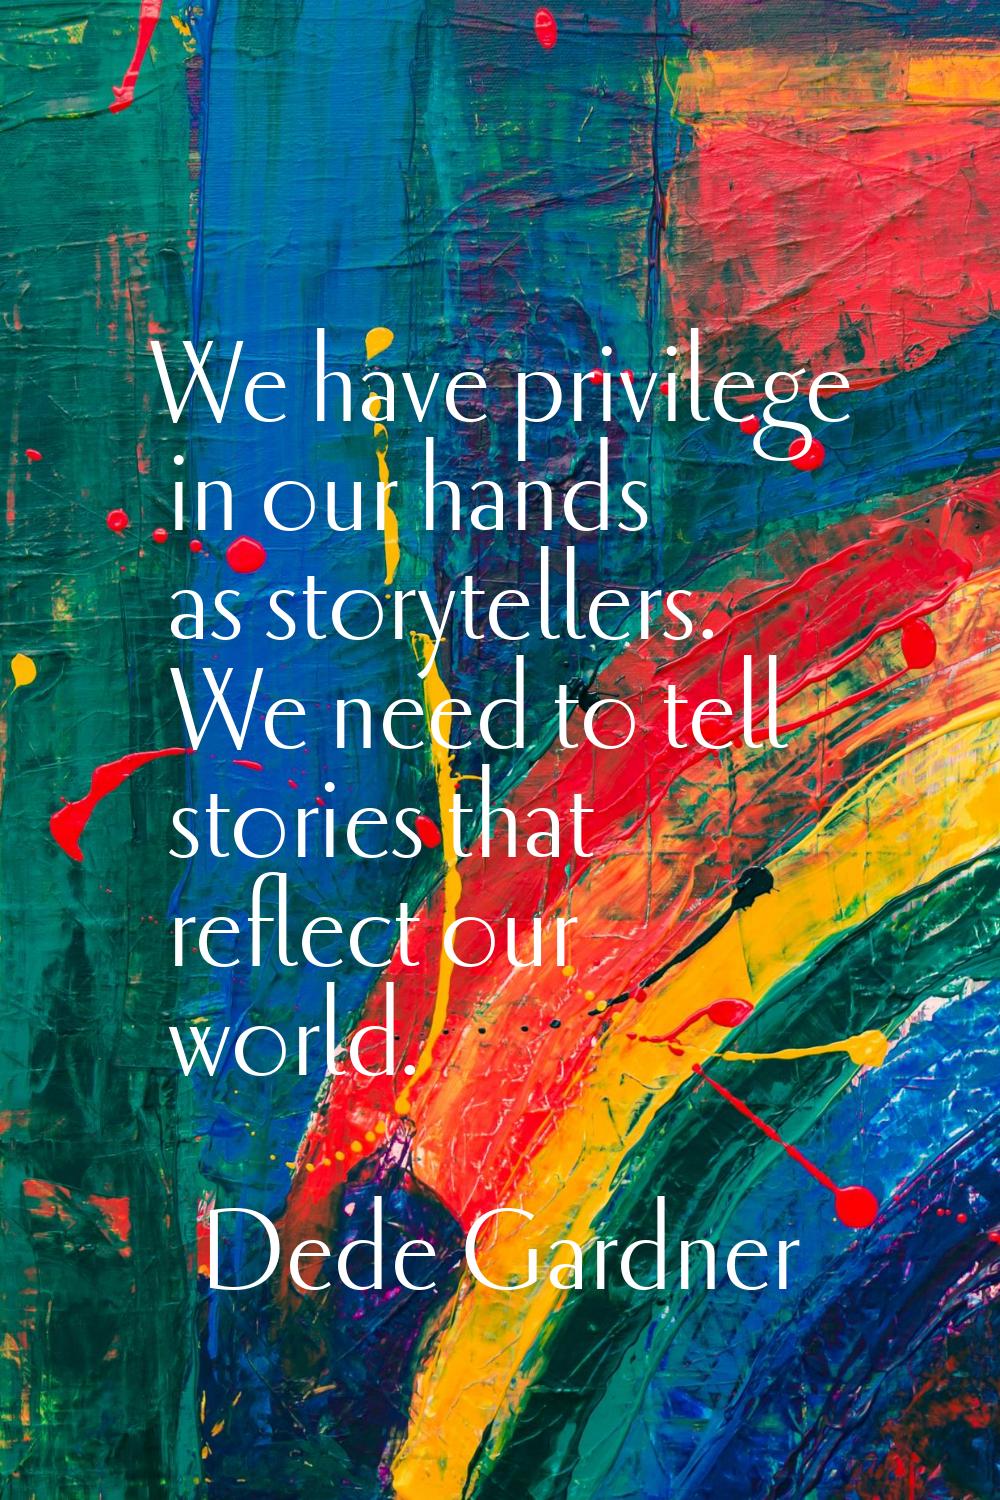 We have privilege in our hands as storytellers. We need to tell stories that reflect our world.